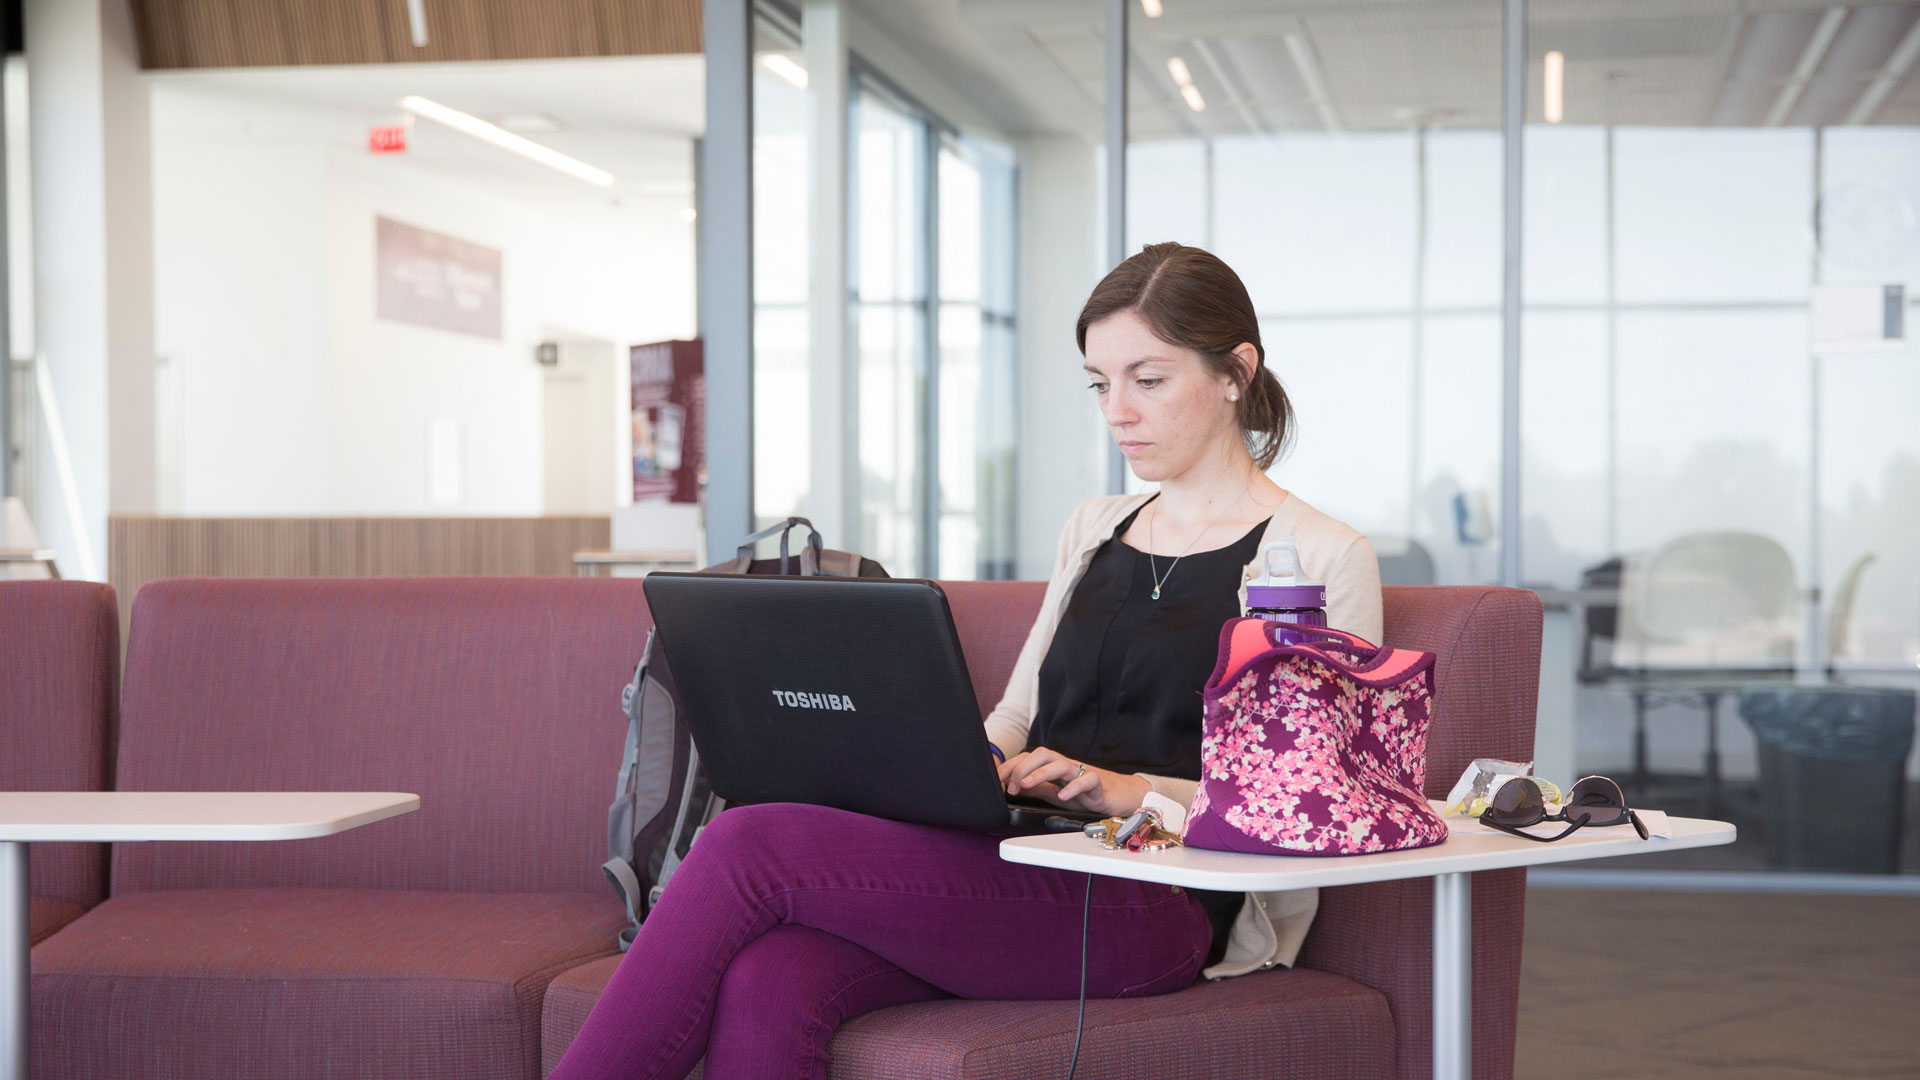 Student sitting on couch using her laptop to study